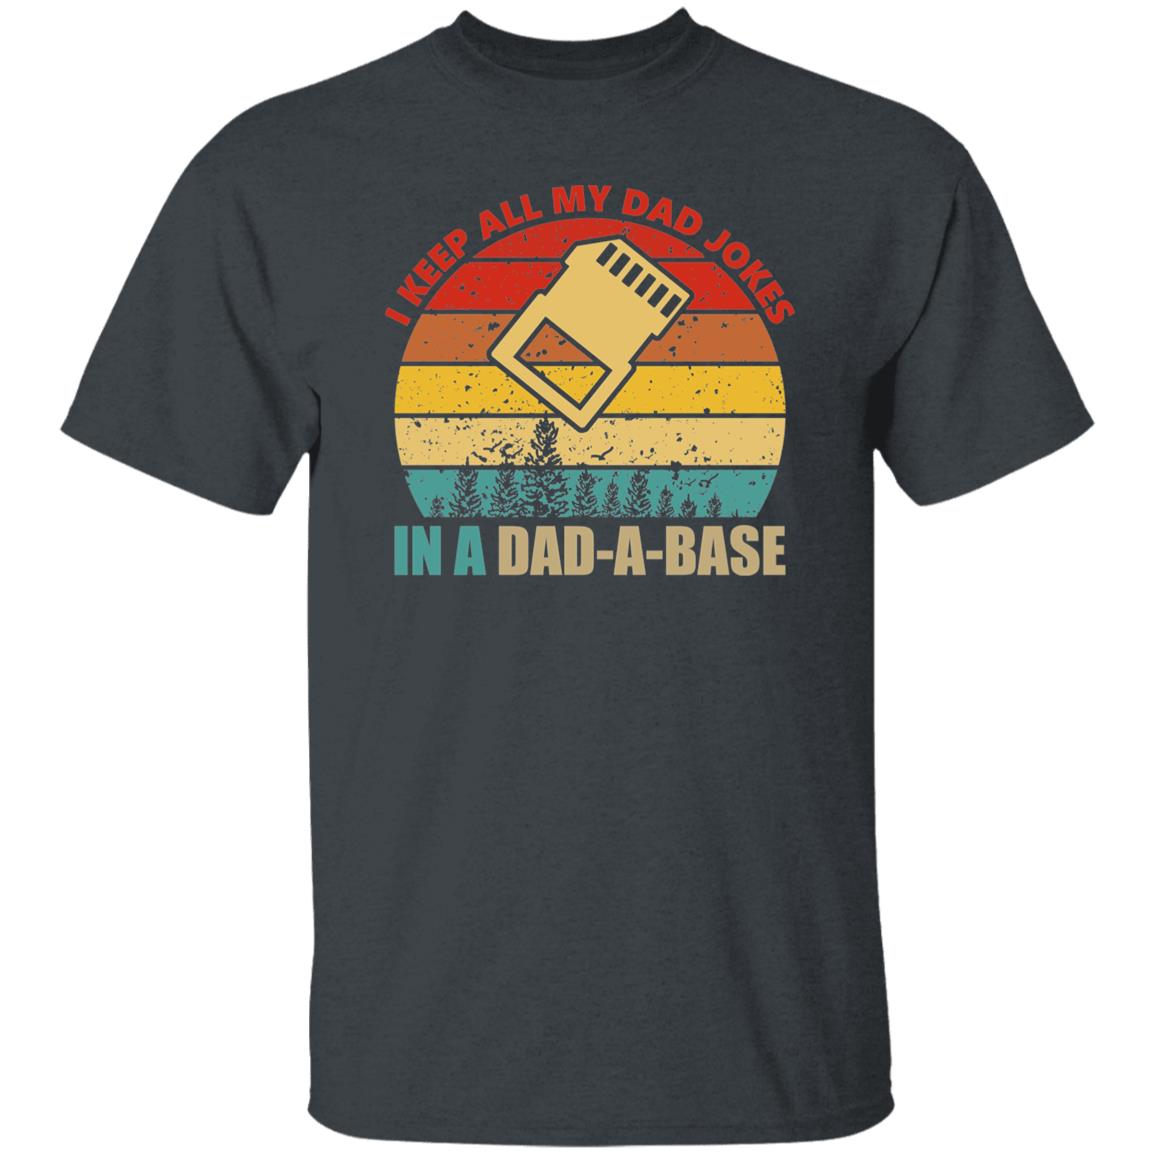 I Keep All My Dad Jokes In A Dad a Base Vintage Shirt For Father